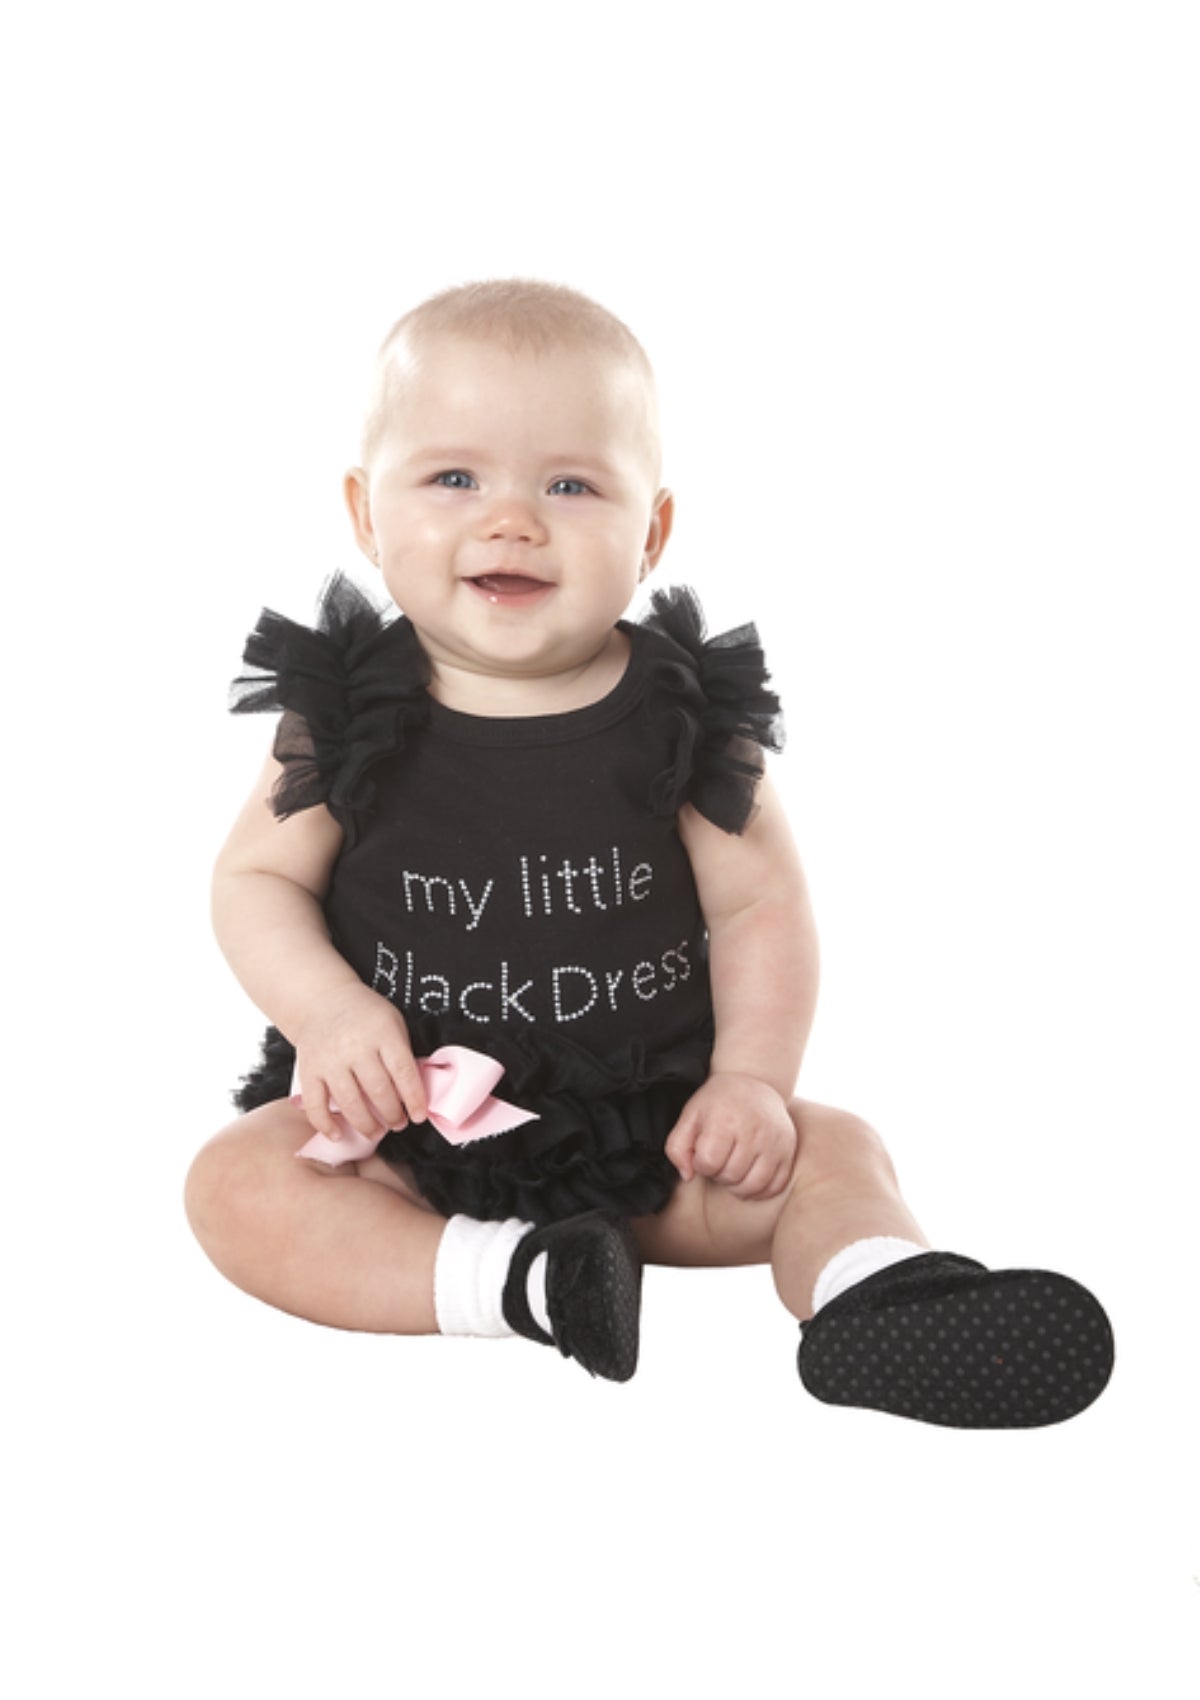 Baby-Clothing For The Littles-New Clothing For The Littles-Ruby Jane.